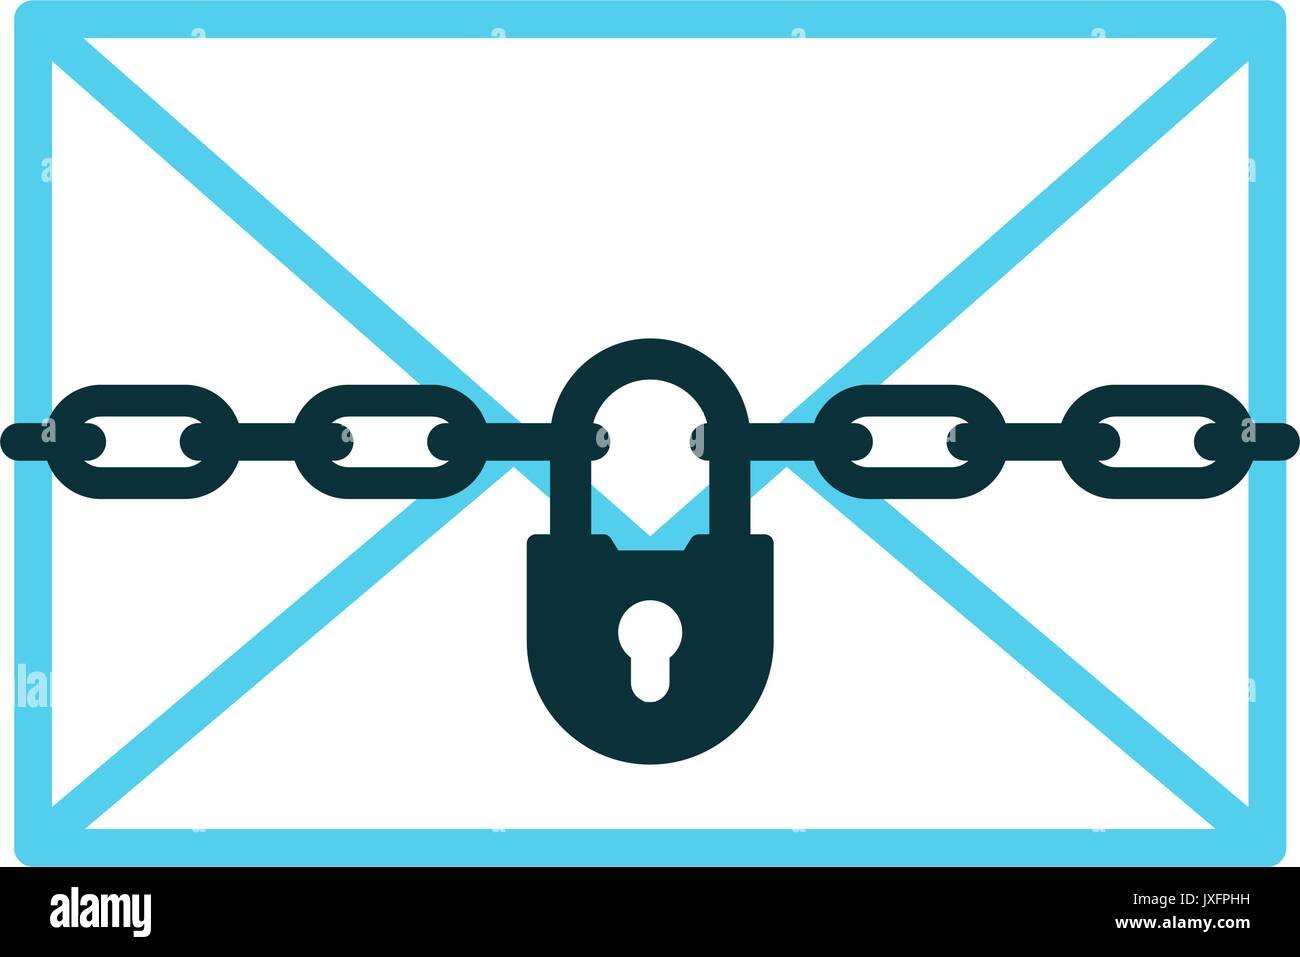 Confidential mail concept - icon of padlock with chain protects letter, vector illustration Stock Vector